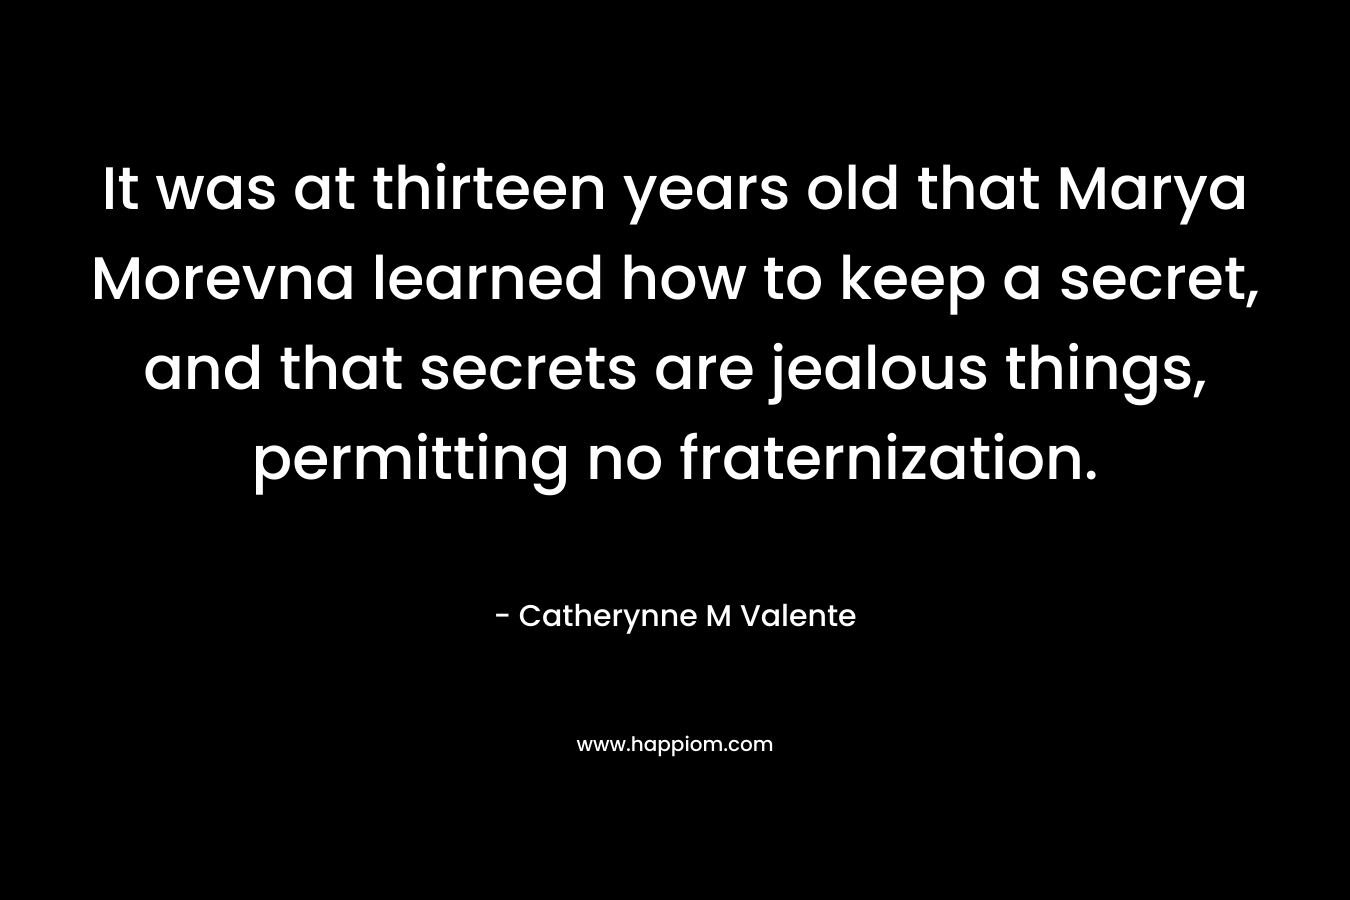 It was at thirteen years old that Marya Morevna learned how to keep a secret, and that secrets are jealous things, permitting no fraternization. – Catherynne M Valente